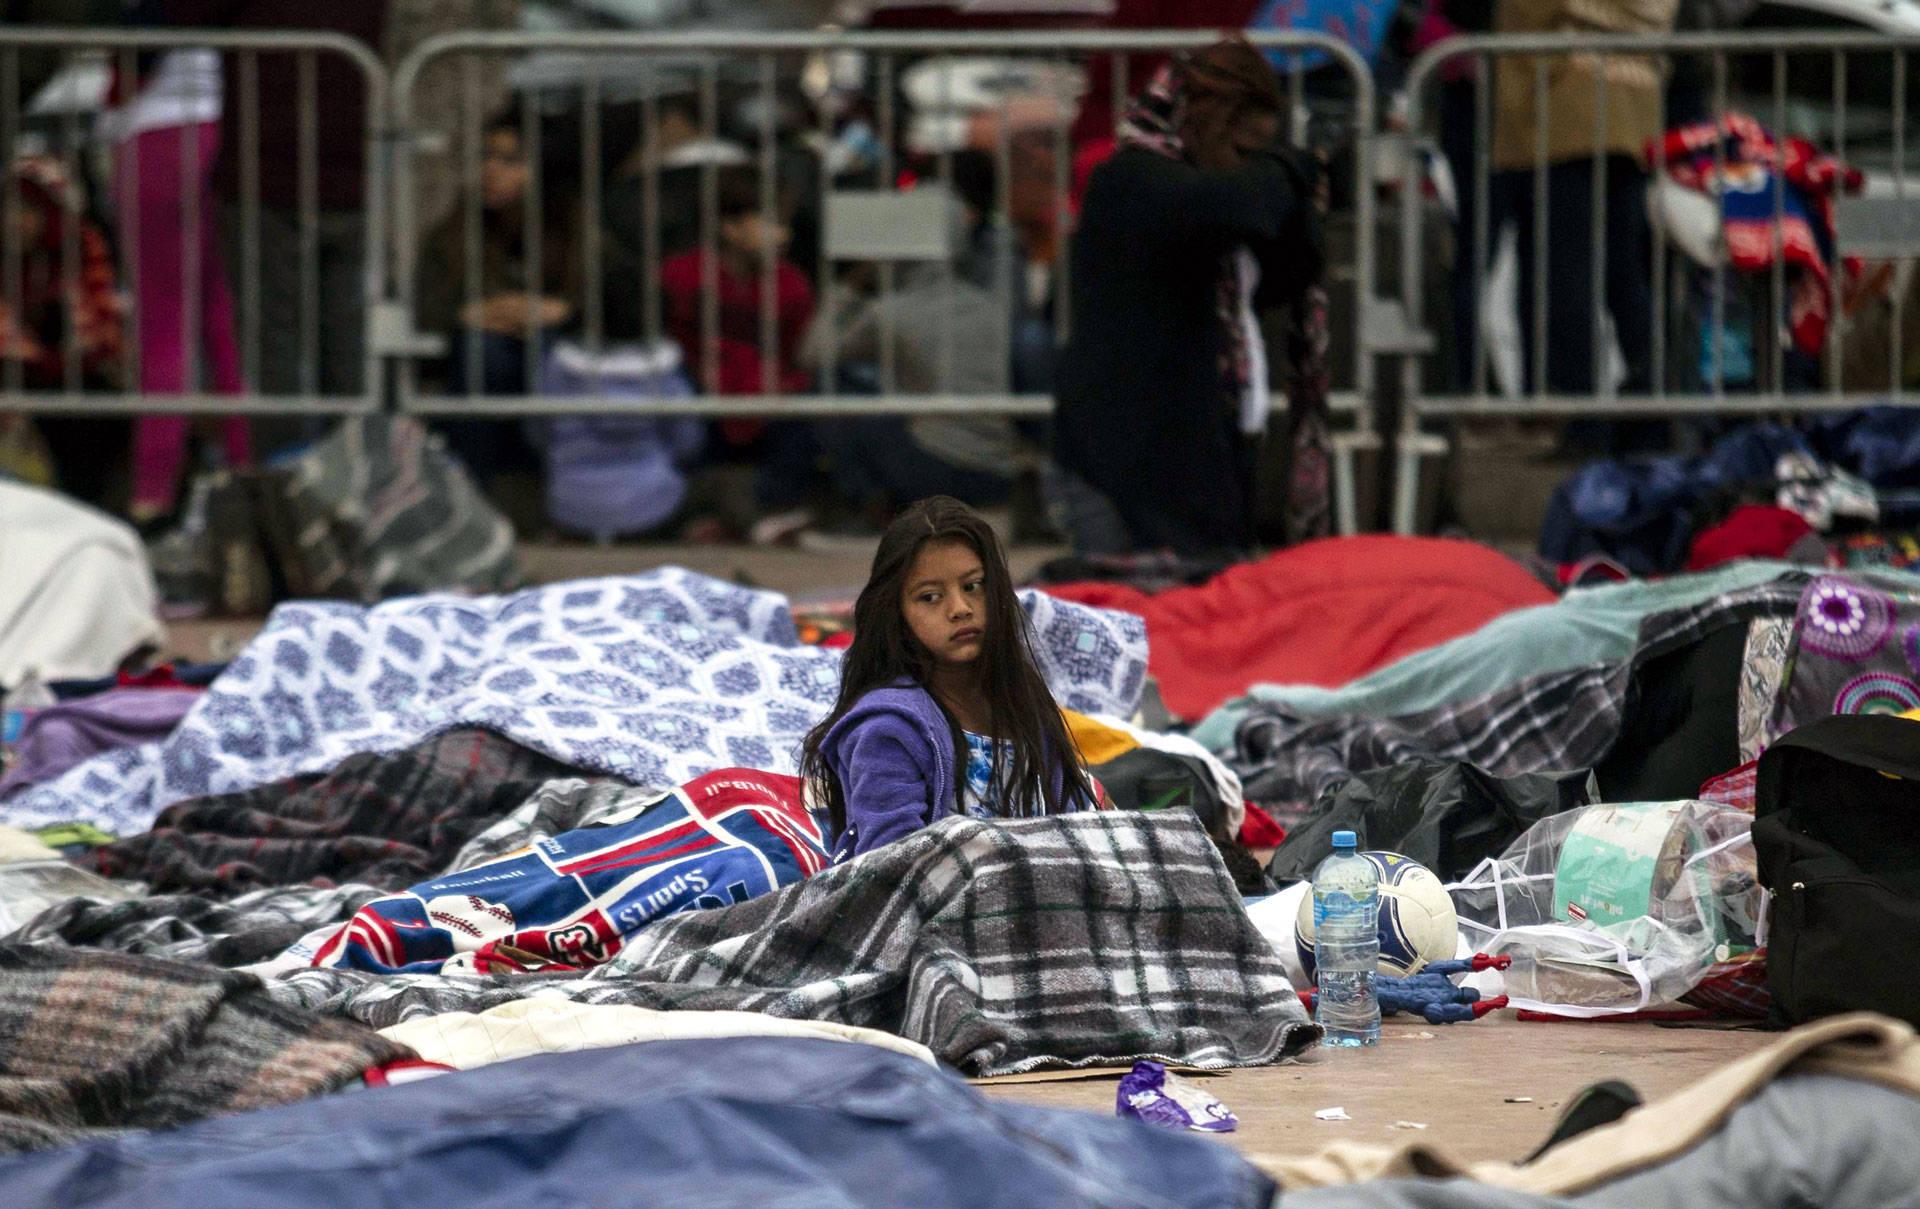 Central American migrants traveling in the 'Migrant Via Crucis' caravan sleep outside 'El Chaparral' port of entry to the U.S. while waiting to be received by U.S. authorities, in Tijuana, Mexico on April 30, 2018. GUILLERMO ARIAS/AFP/Getty Images